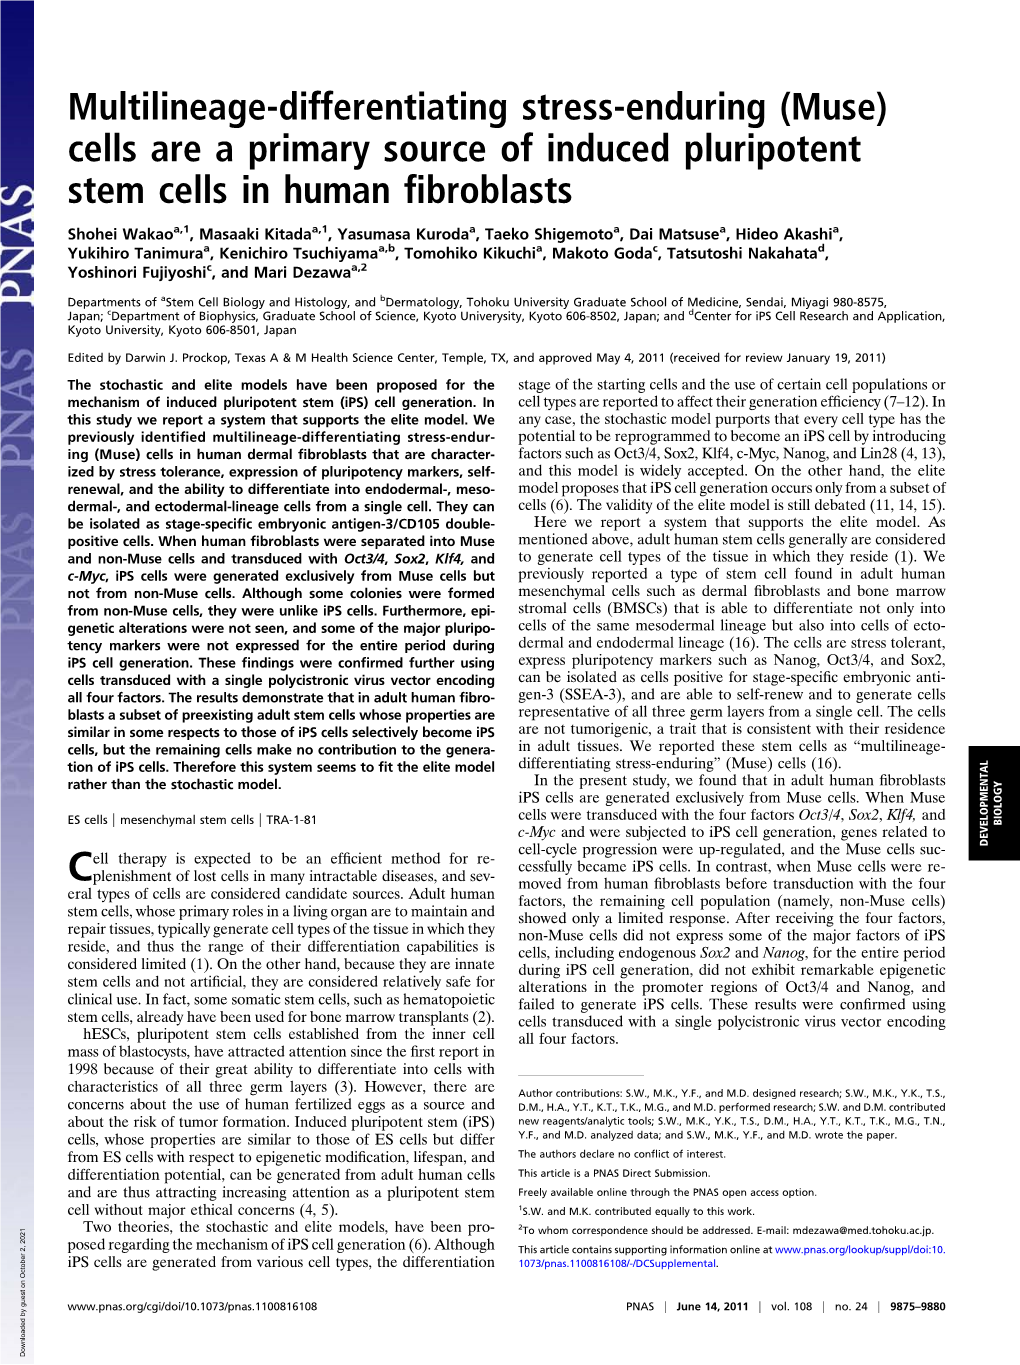 (Muse) Cells Are a Primary Source of Induced Pluripotent Stem Cells in Human ﬁbroblasts